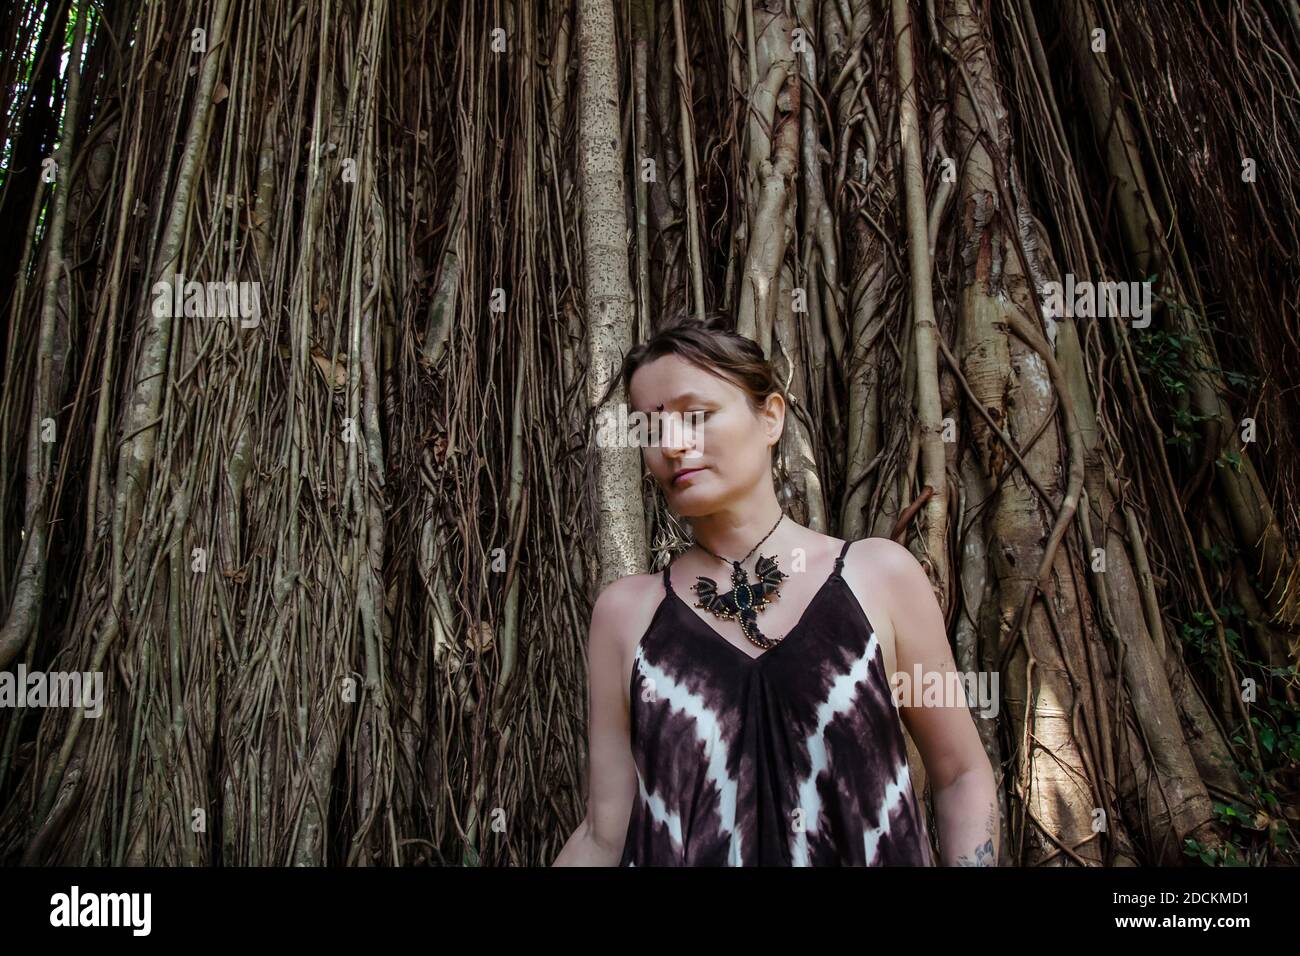 Portrait of woman in front of Bodhi tree Stock Photo